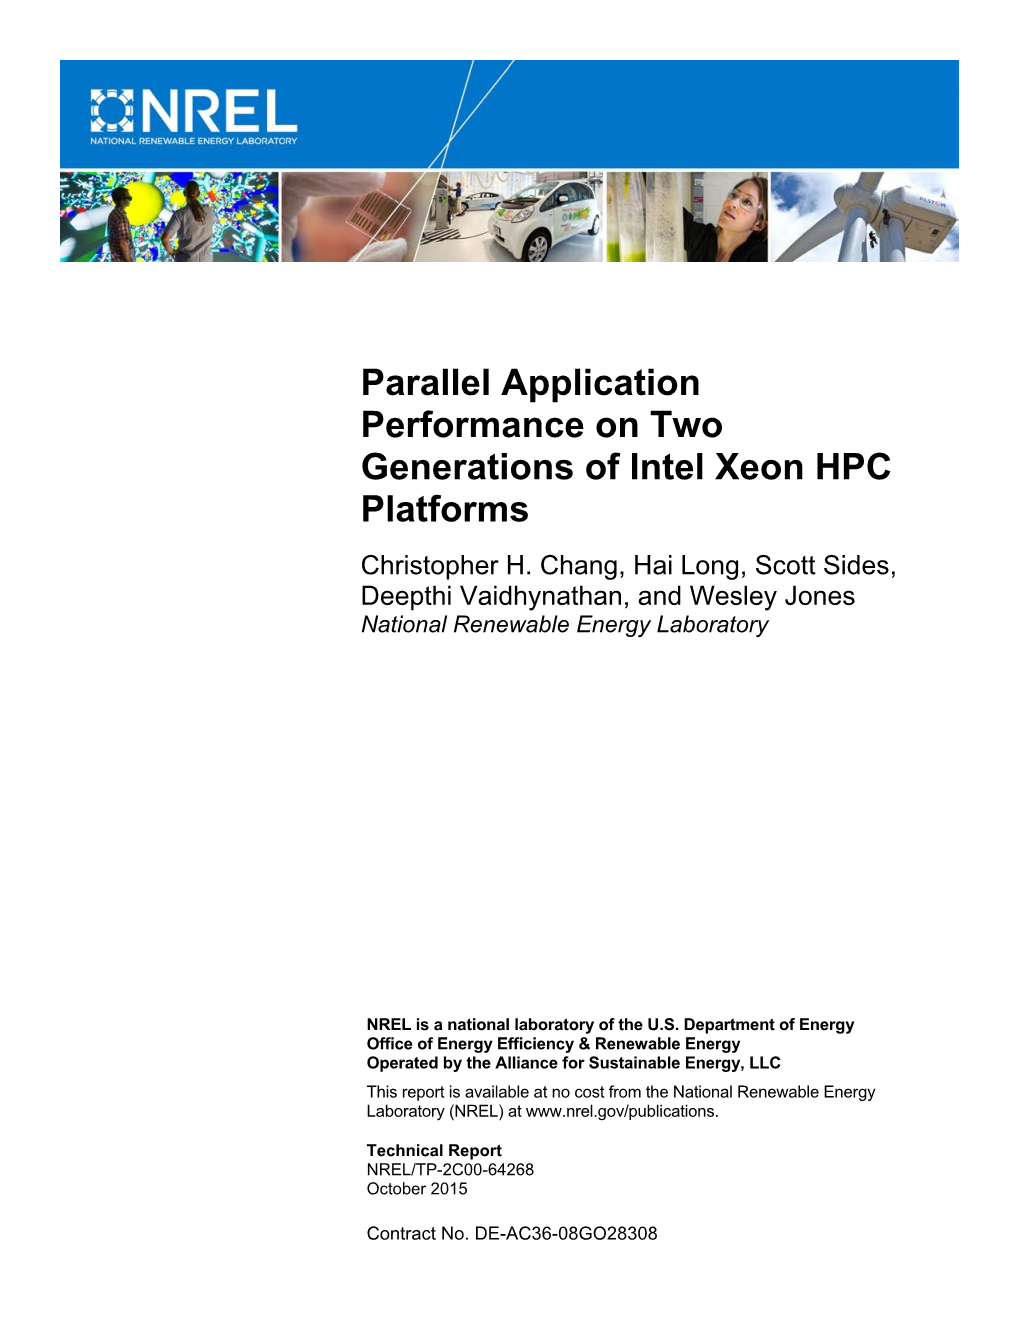 Parallel Application Performance on Two Generations of Intel Xeon HPC Platforms Christopher H